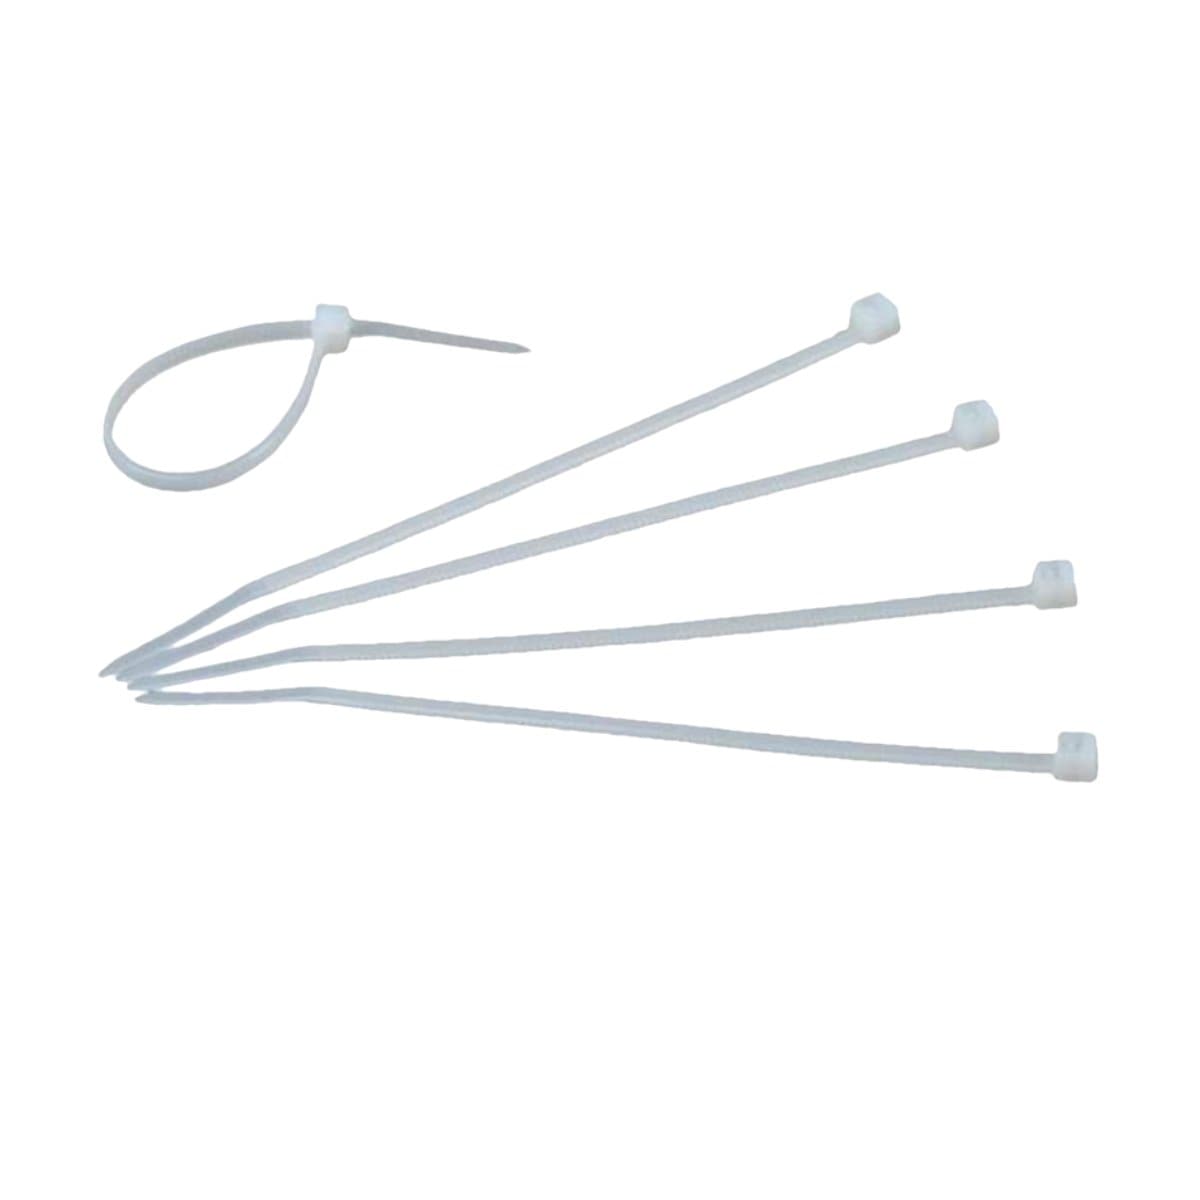 Nylon Cable Ties, 100/pack, White